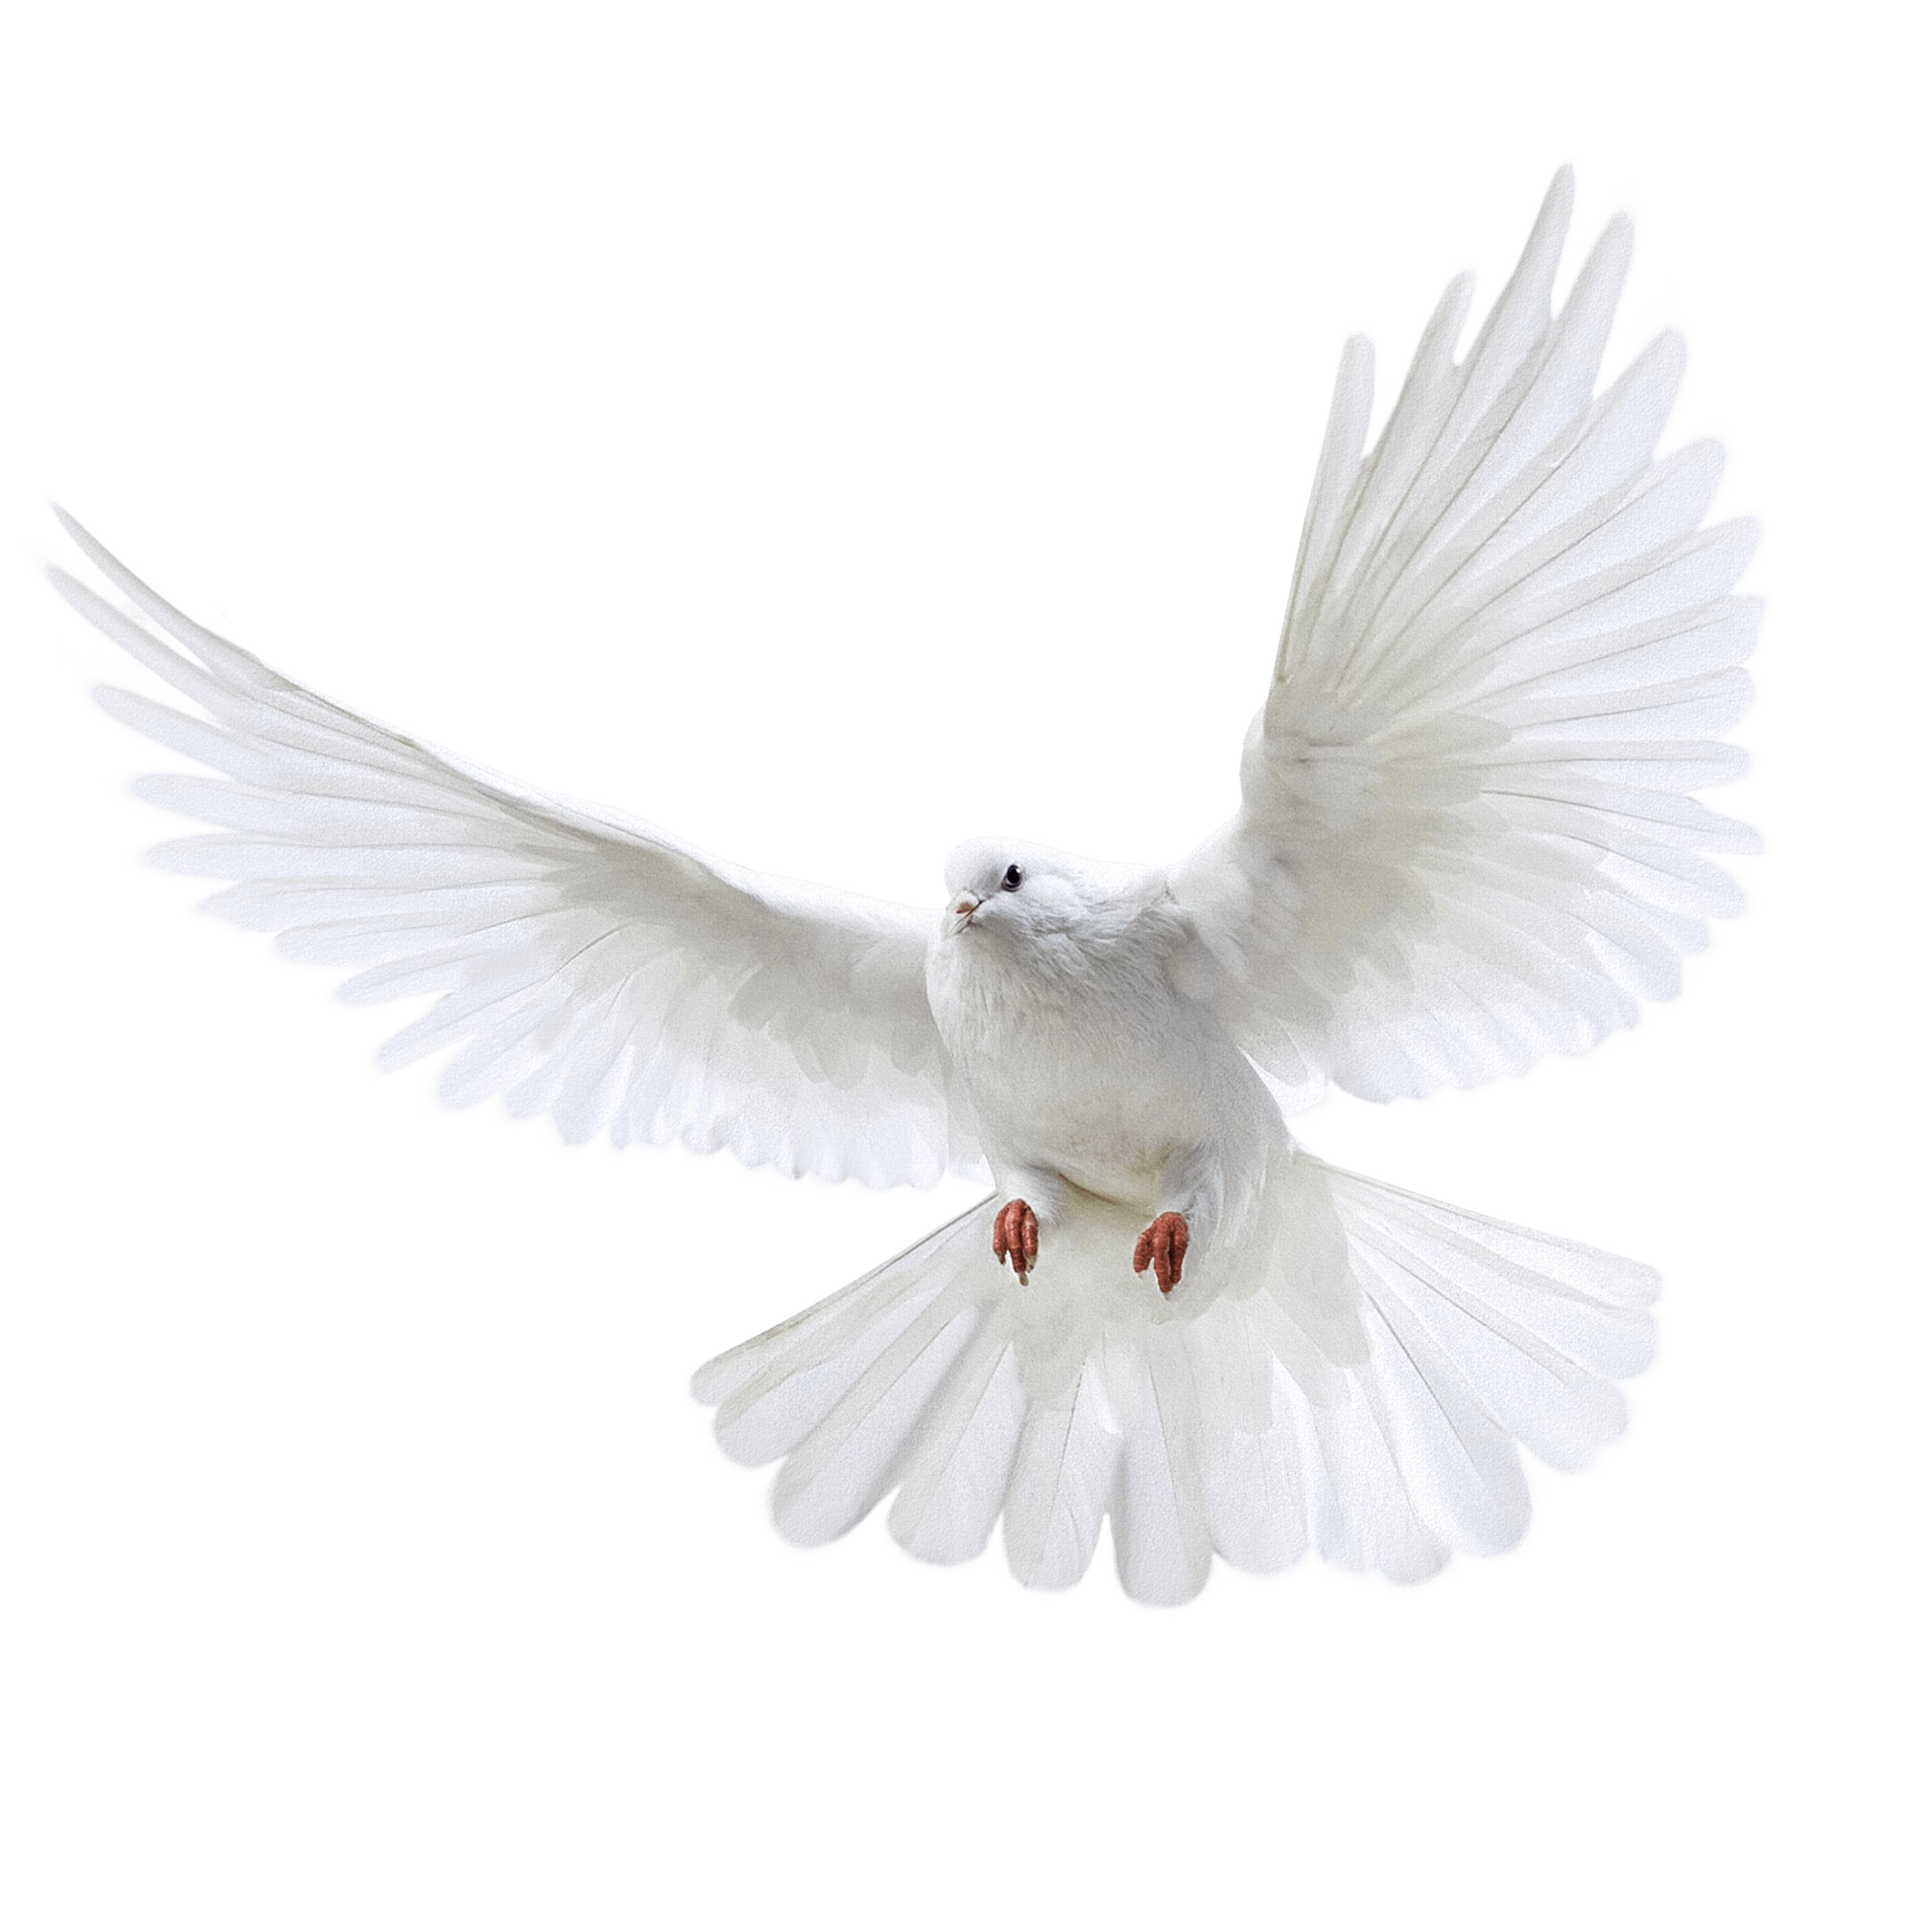 White Pigeon flying